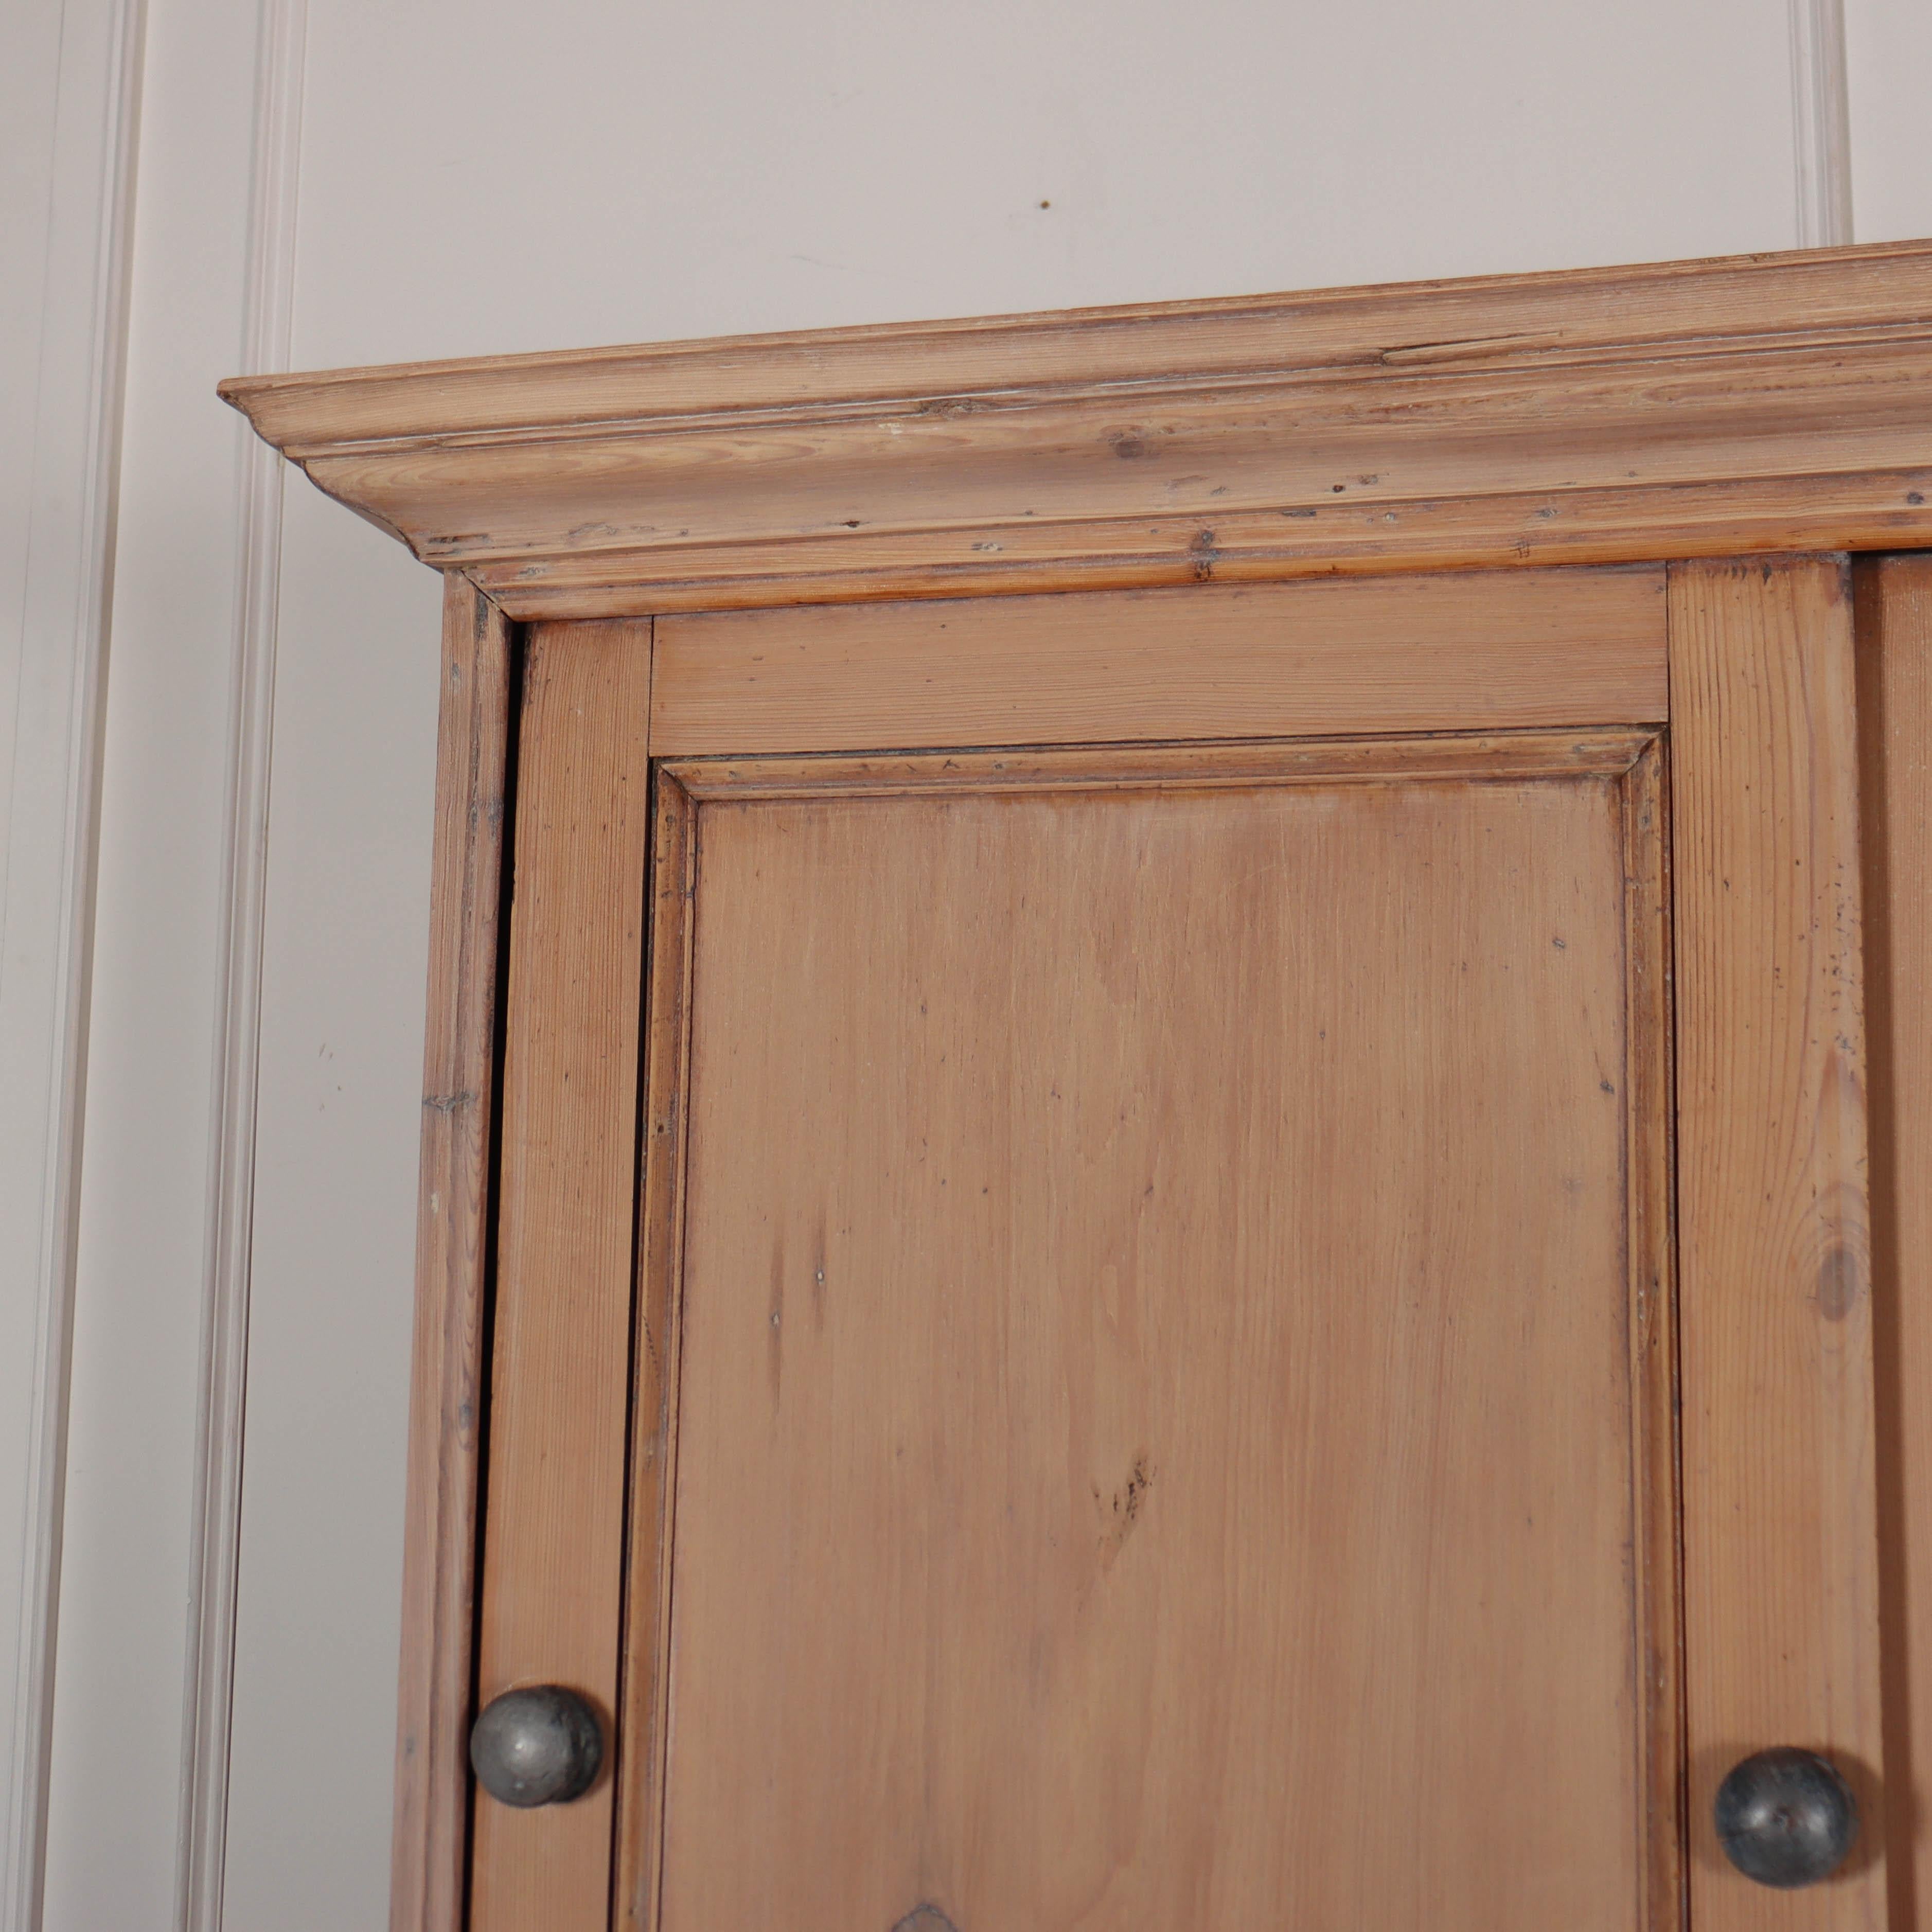 Early 19th C English bleached pine housekeepers cupboard with sliding doors. 1840.

Internal top depth is 12.5